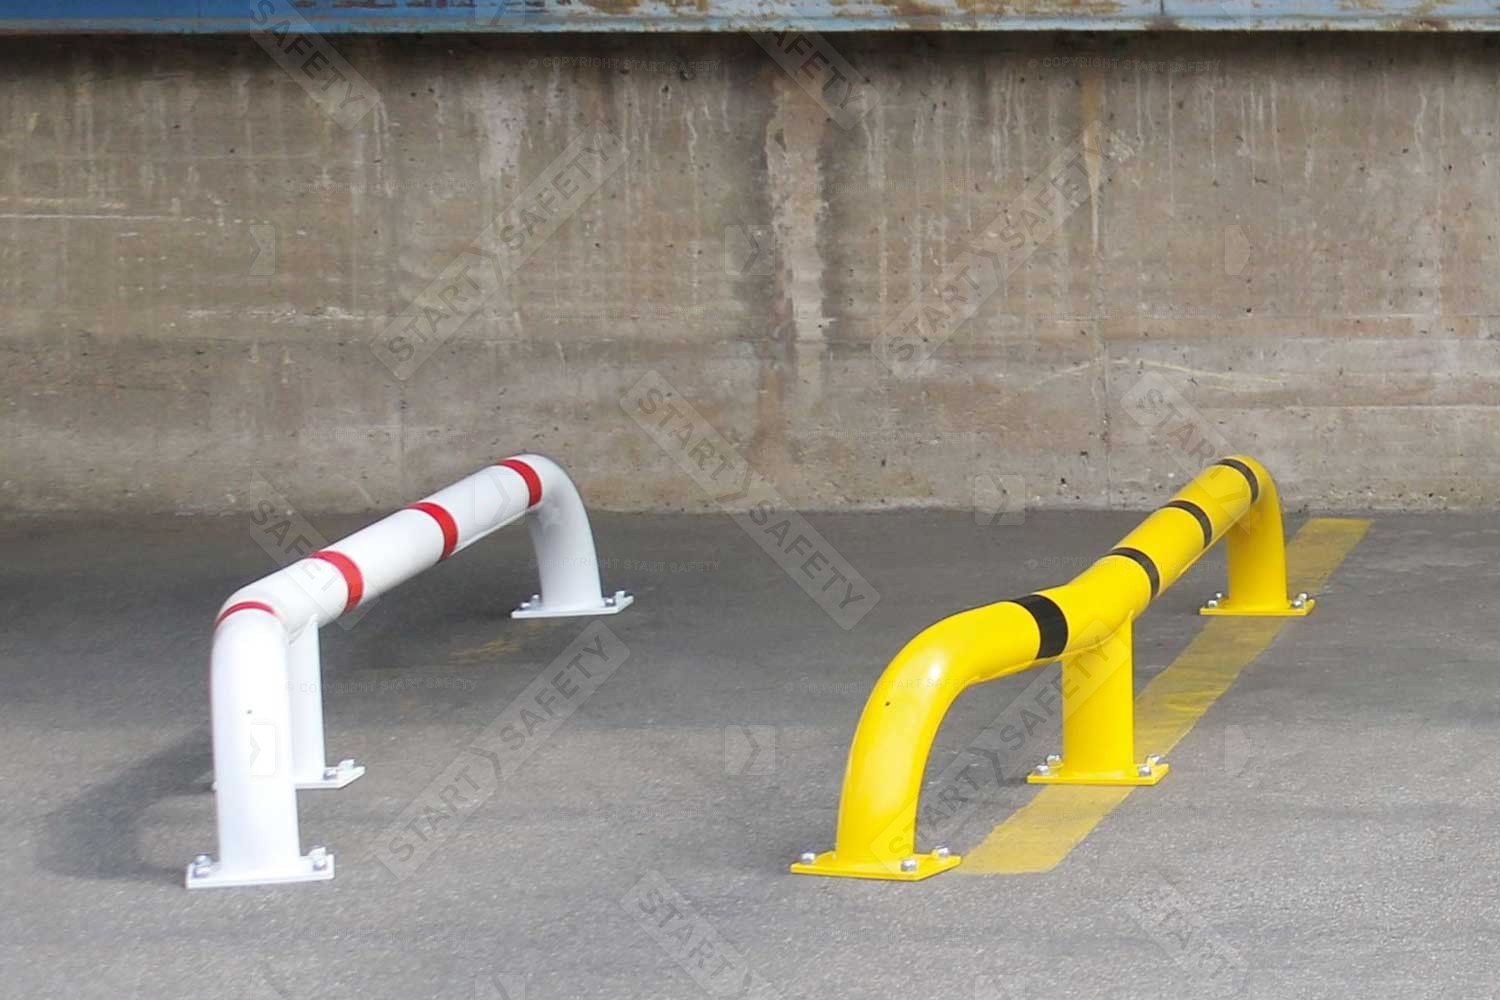 Contrasting White & Yellow Black Bull HGV Wheel Guides Installed By A Loading Bay